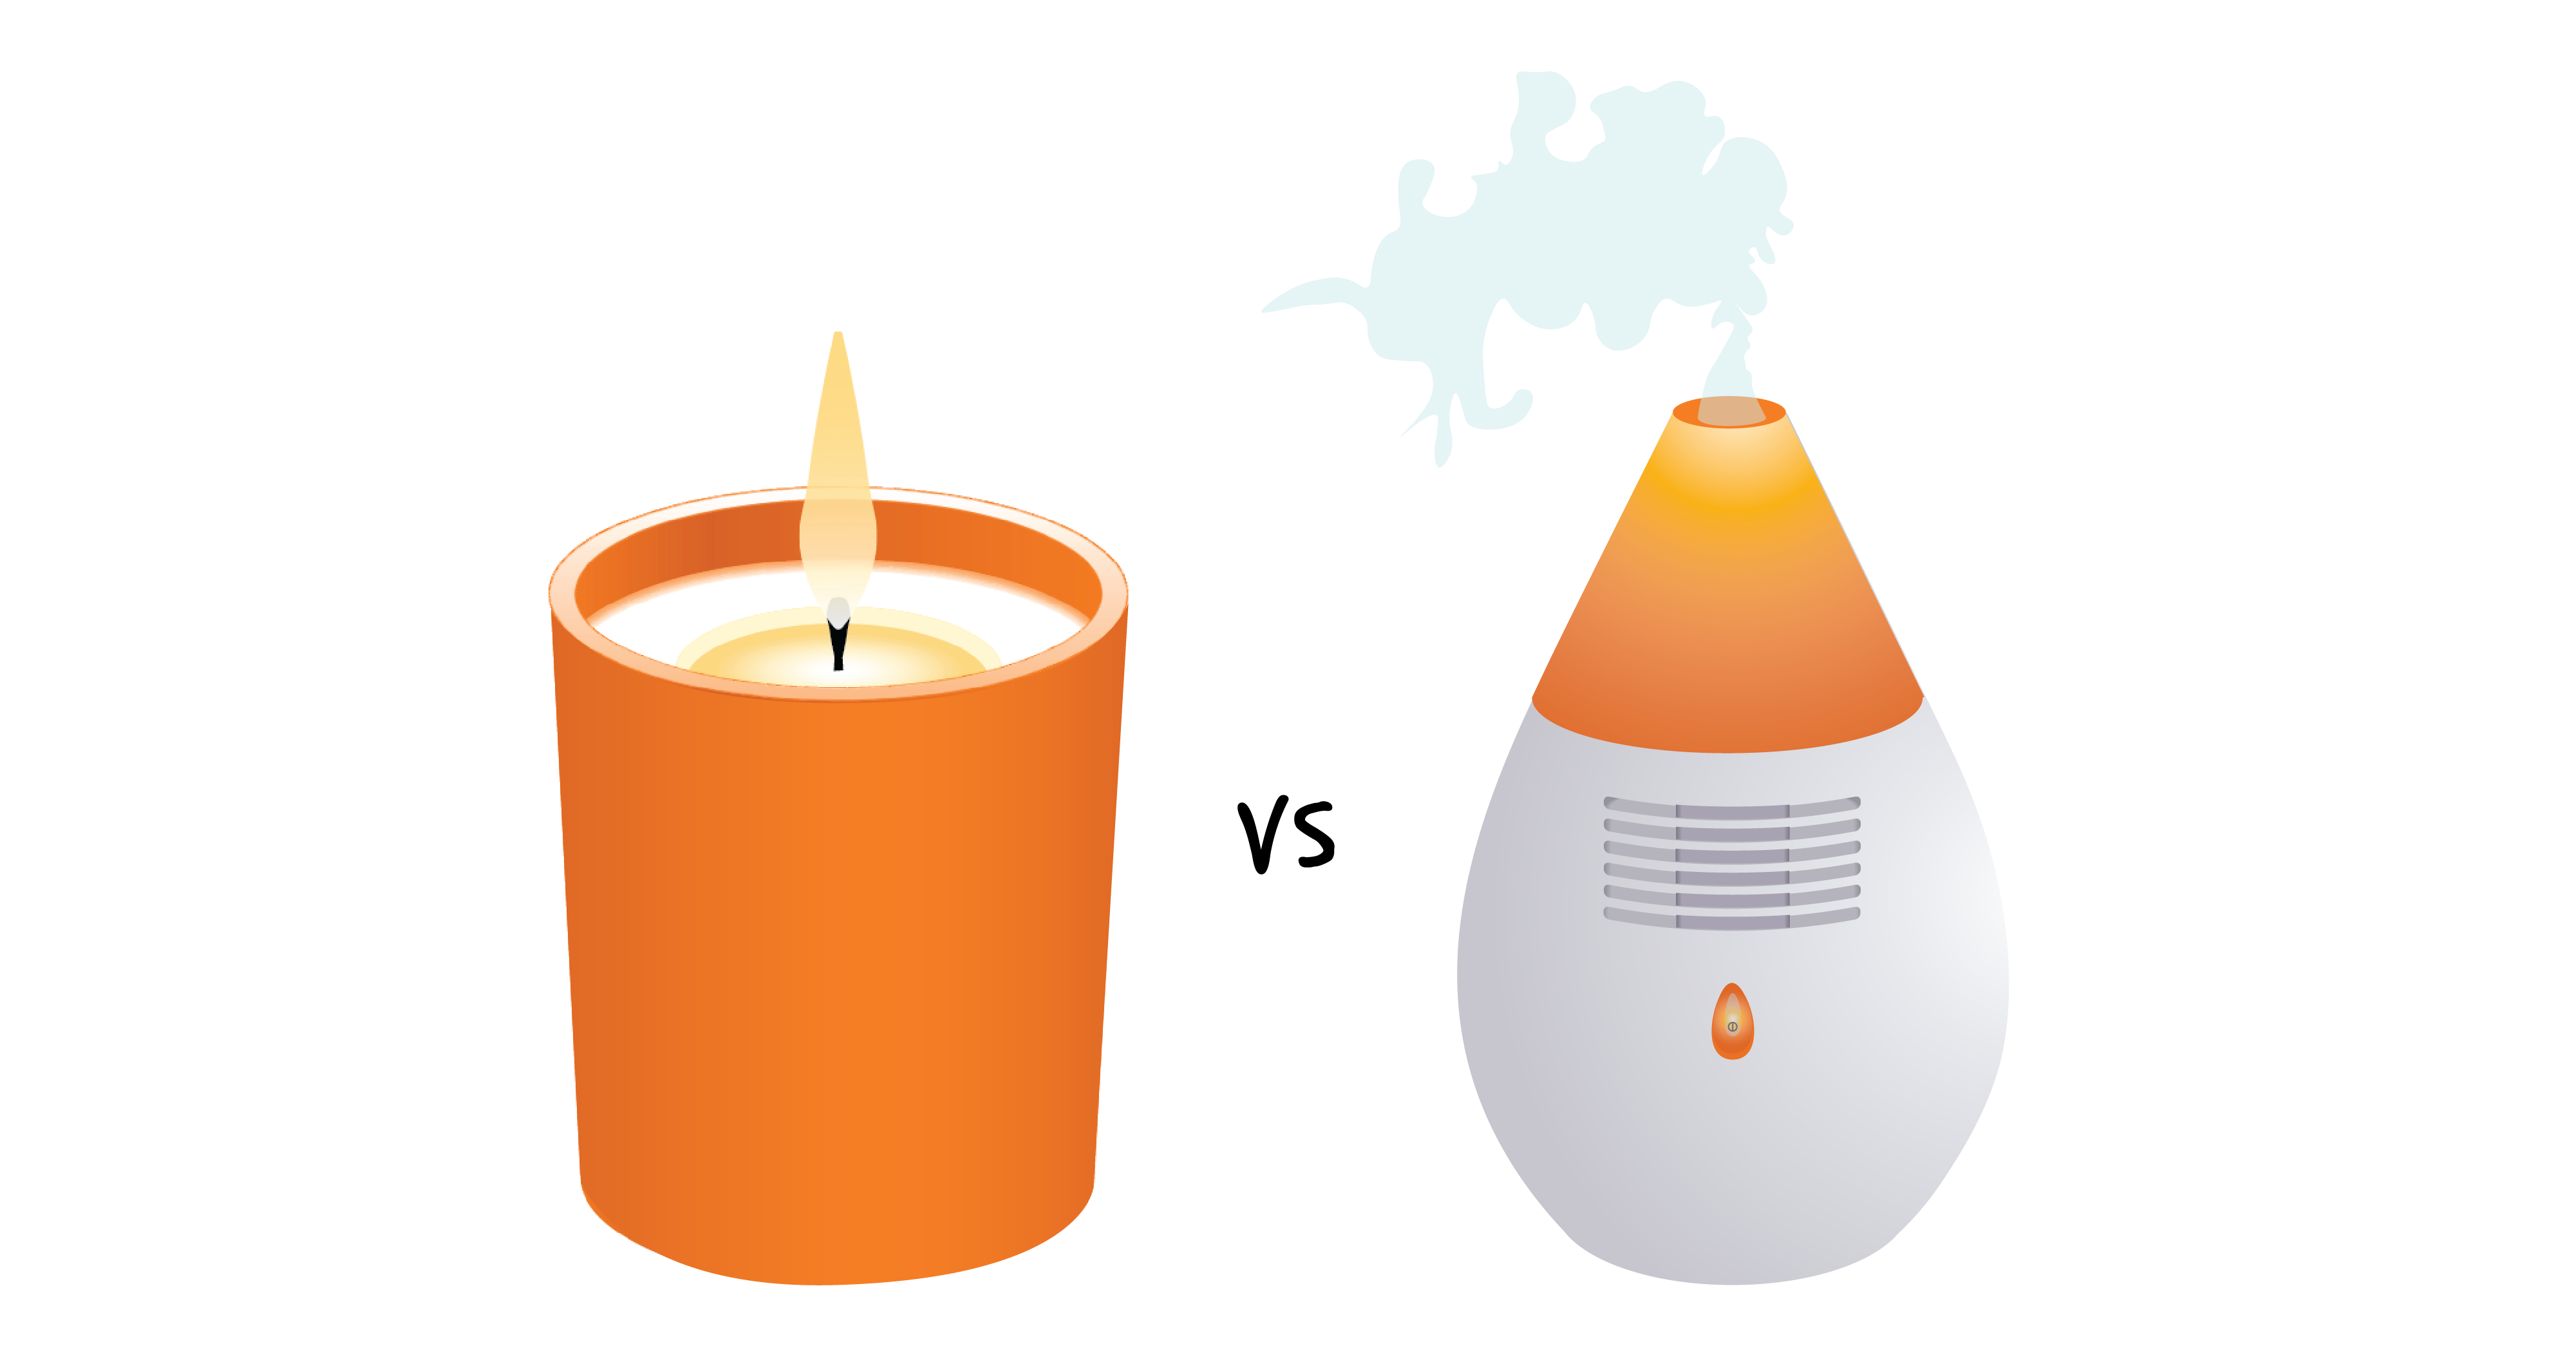 Left: a lit orange candle. Center: versus text. Right: orange and white oil diffuser with steam being emitted.